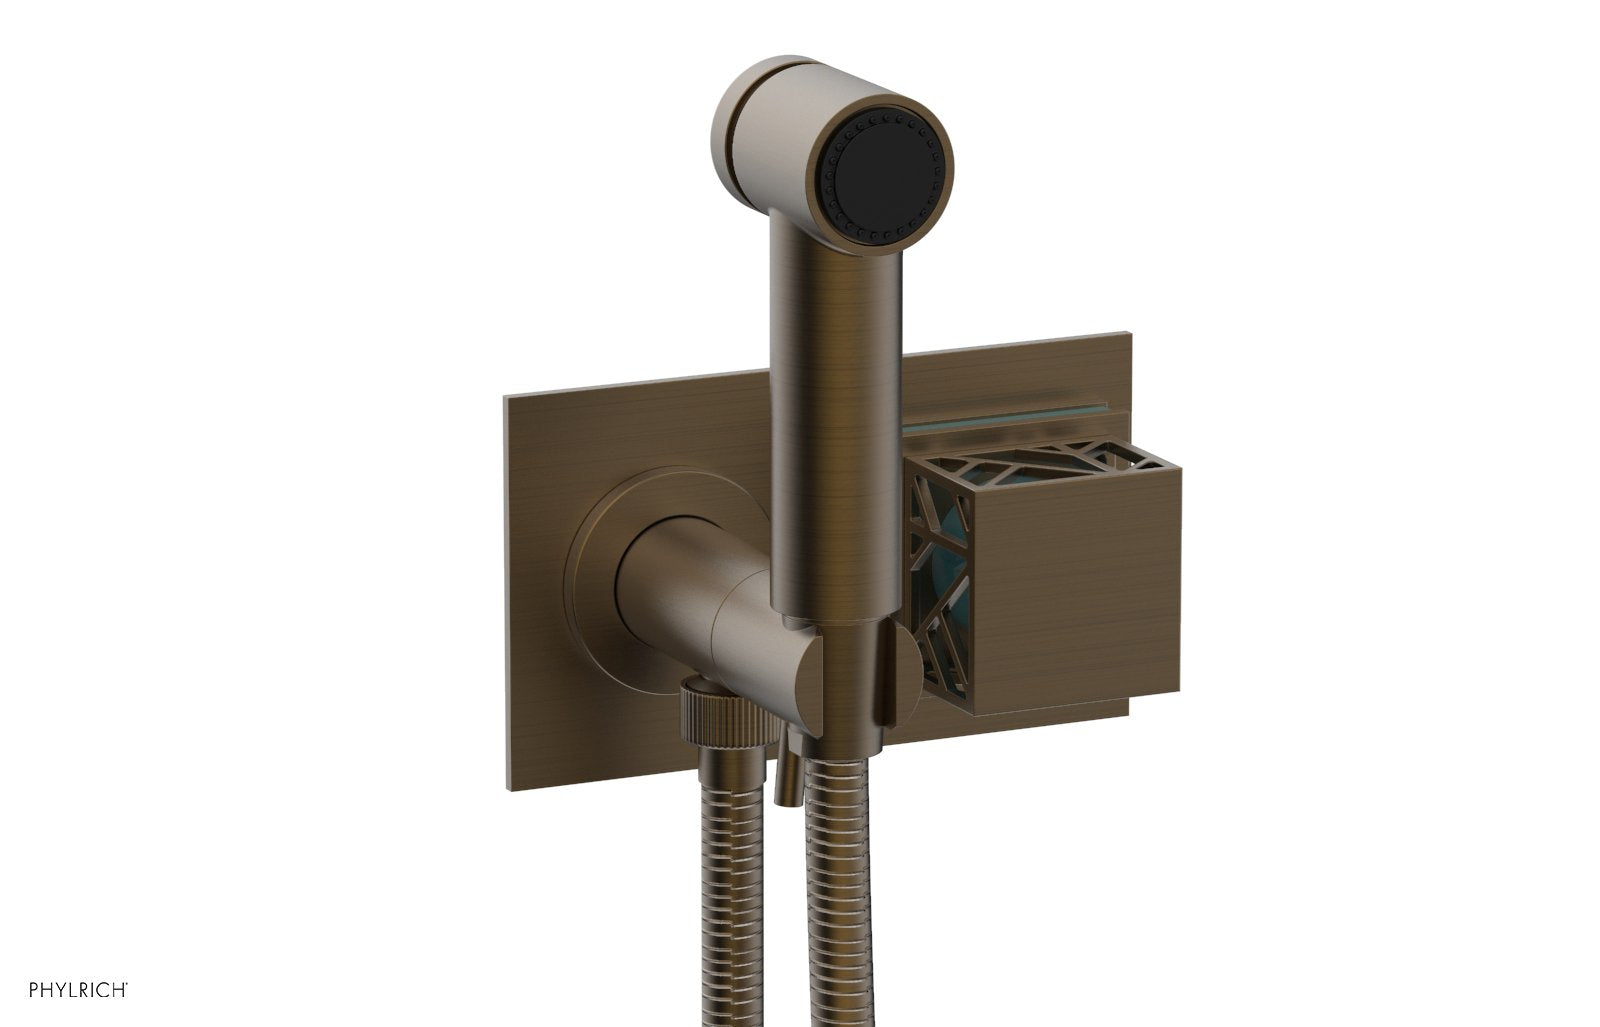 Phylrich JOLIE Wall Mounted Bidet, Square Handle with "Turquoise" Accents